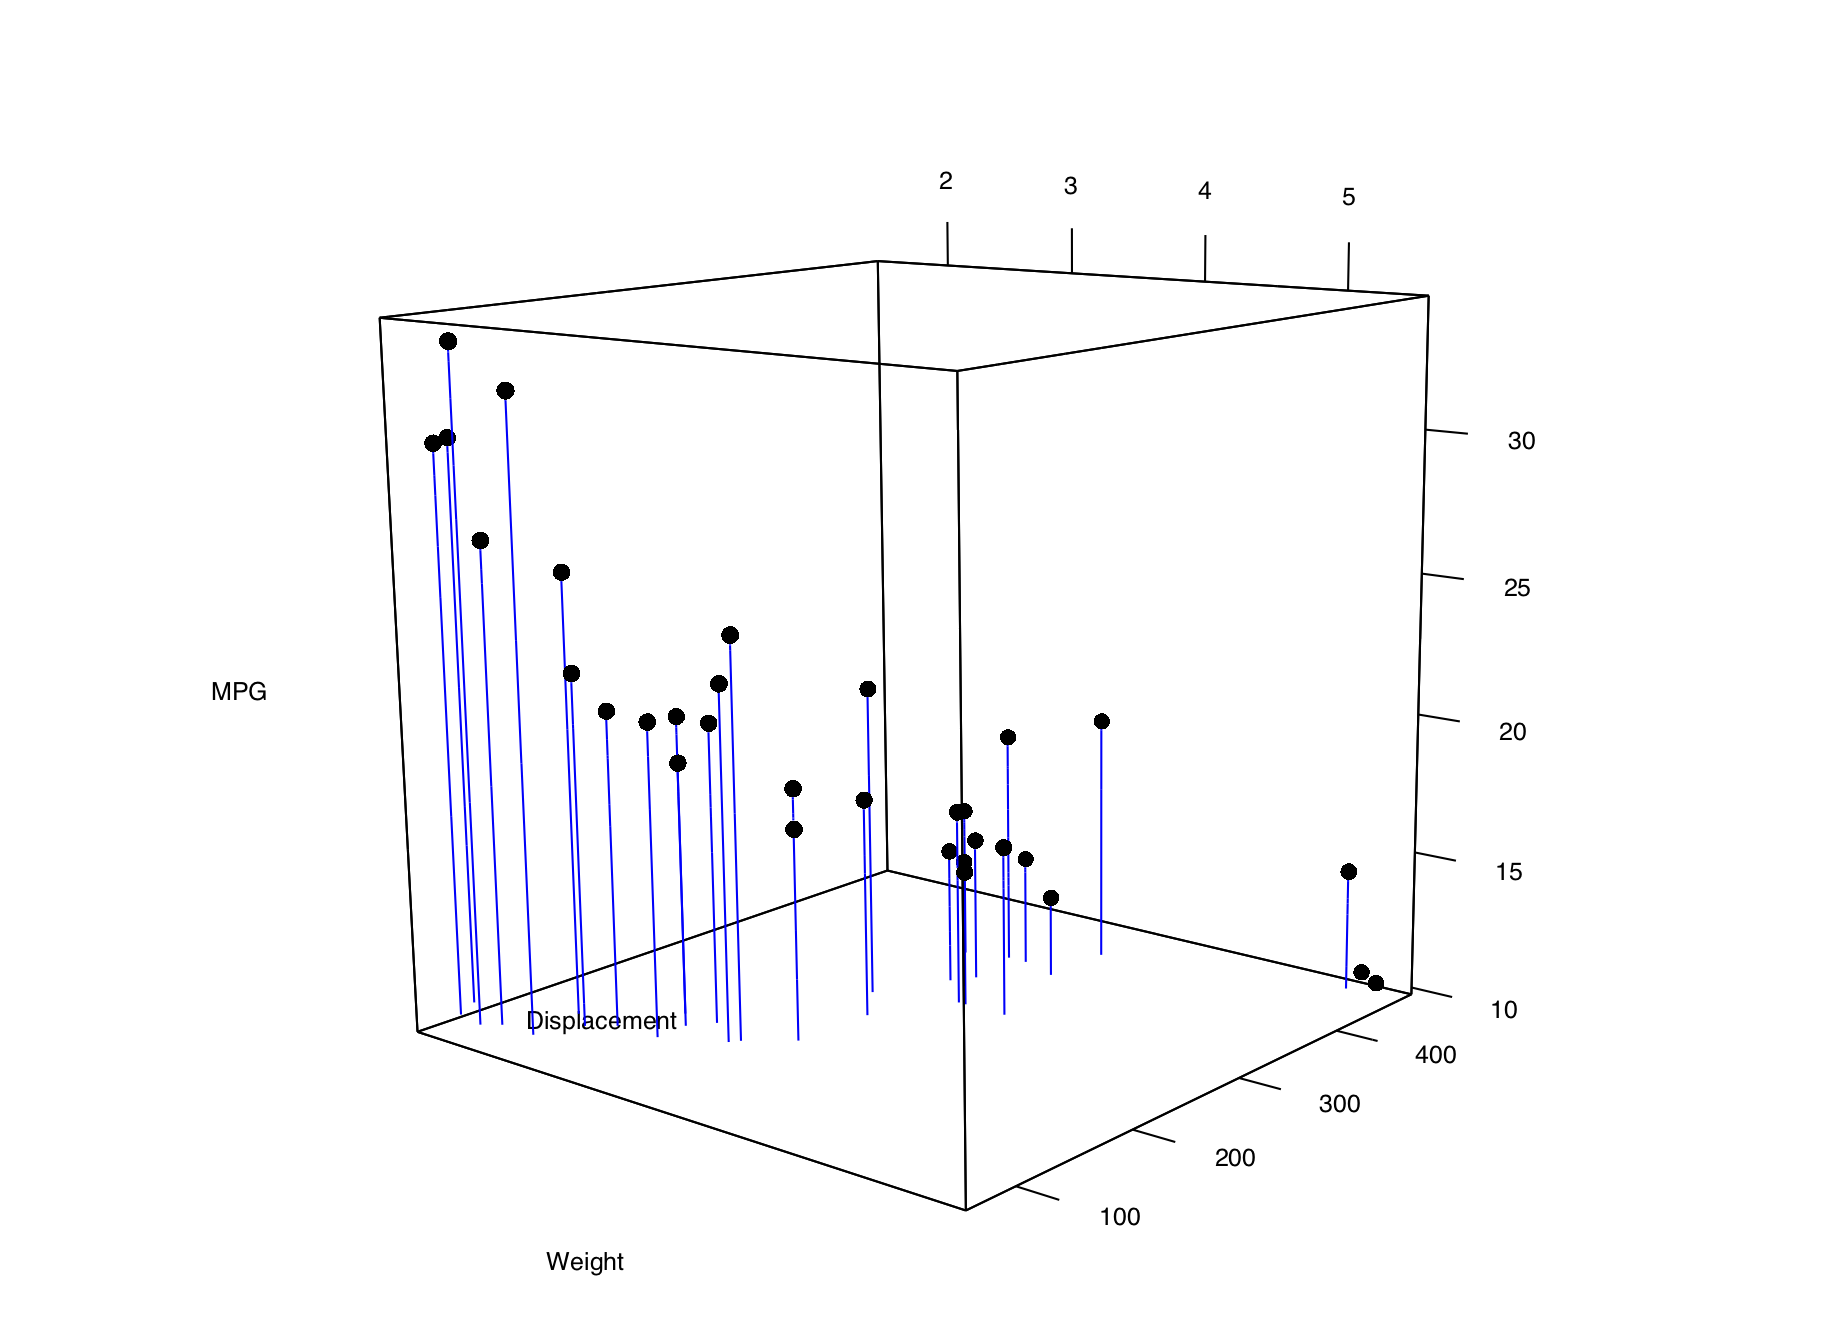 A 3D scatter plot with vertical lines for each point